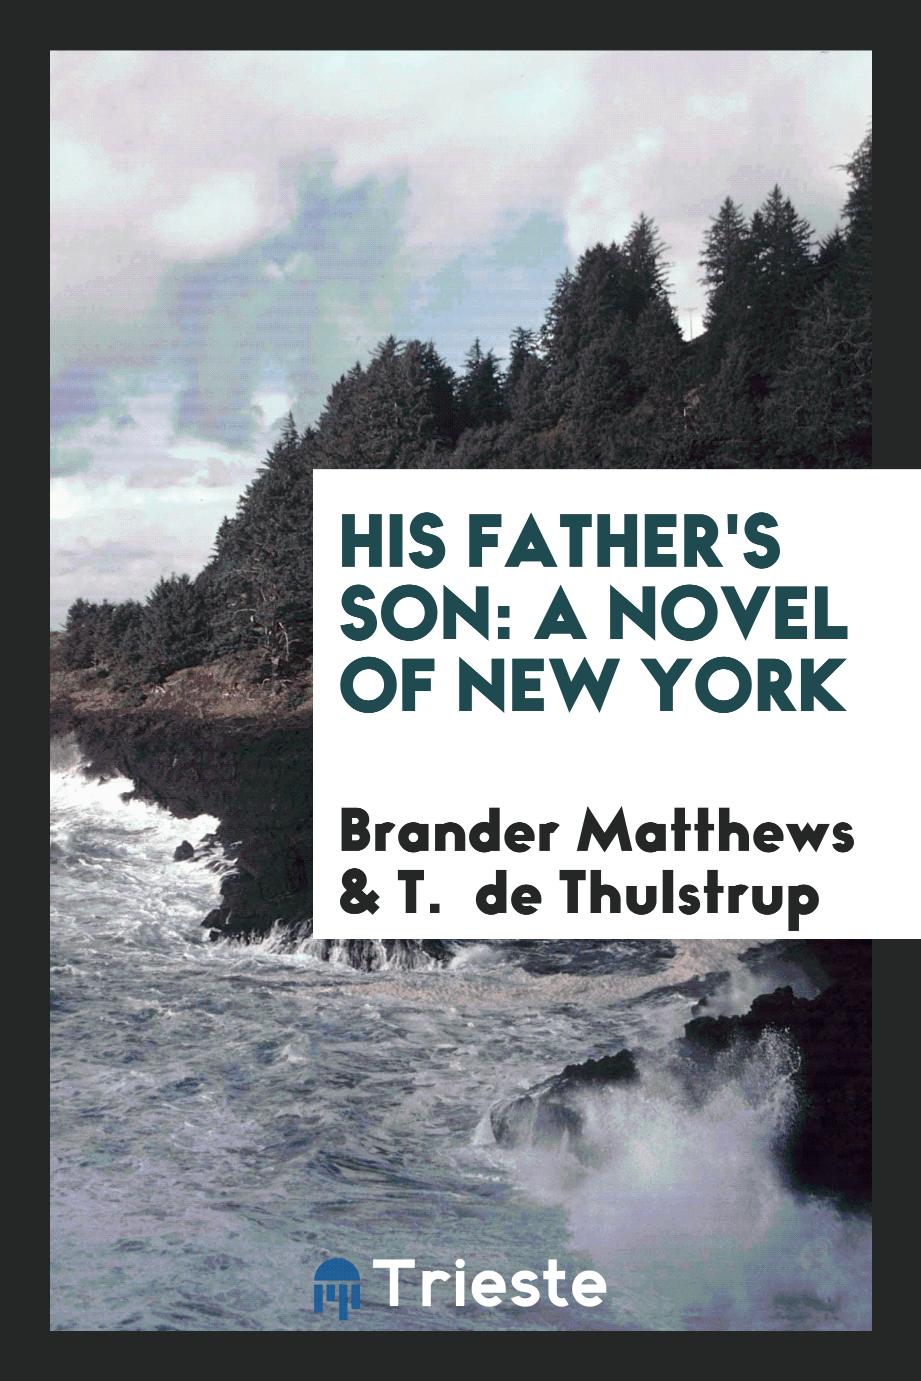 His Father's Son: A Novel of New York